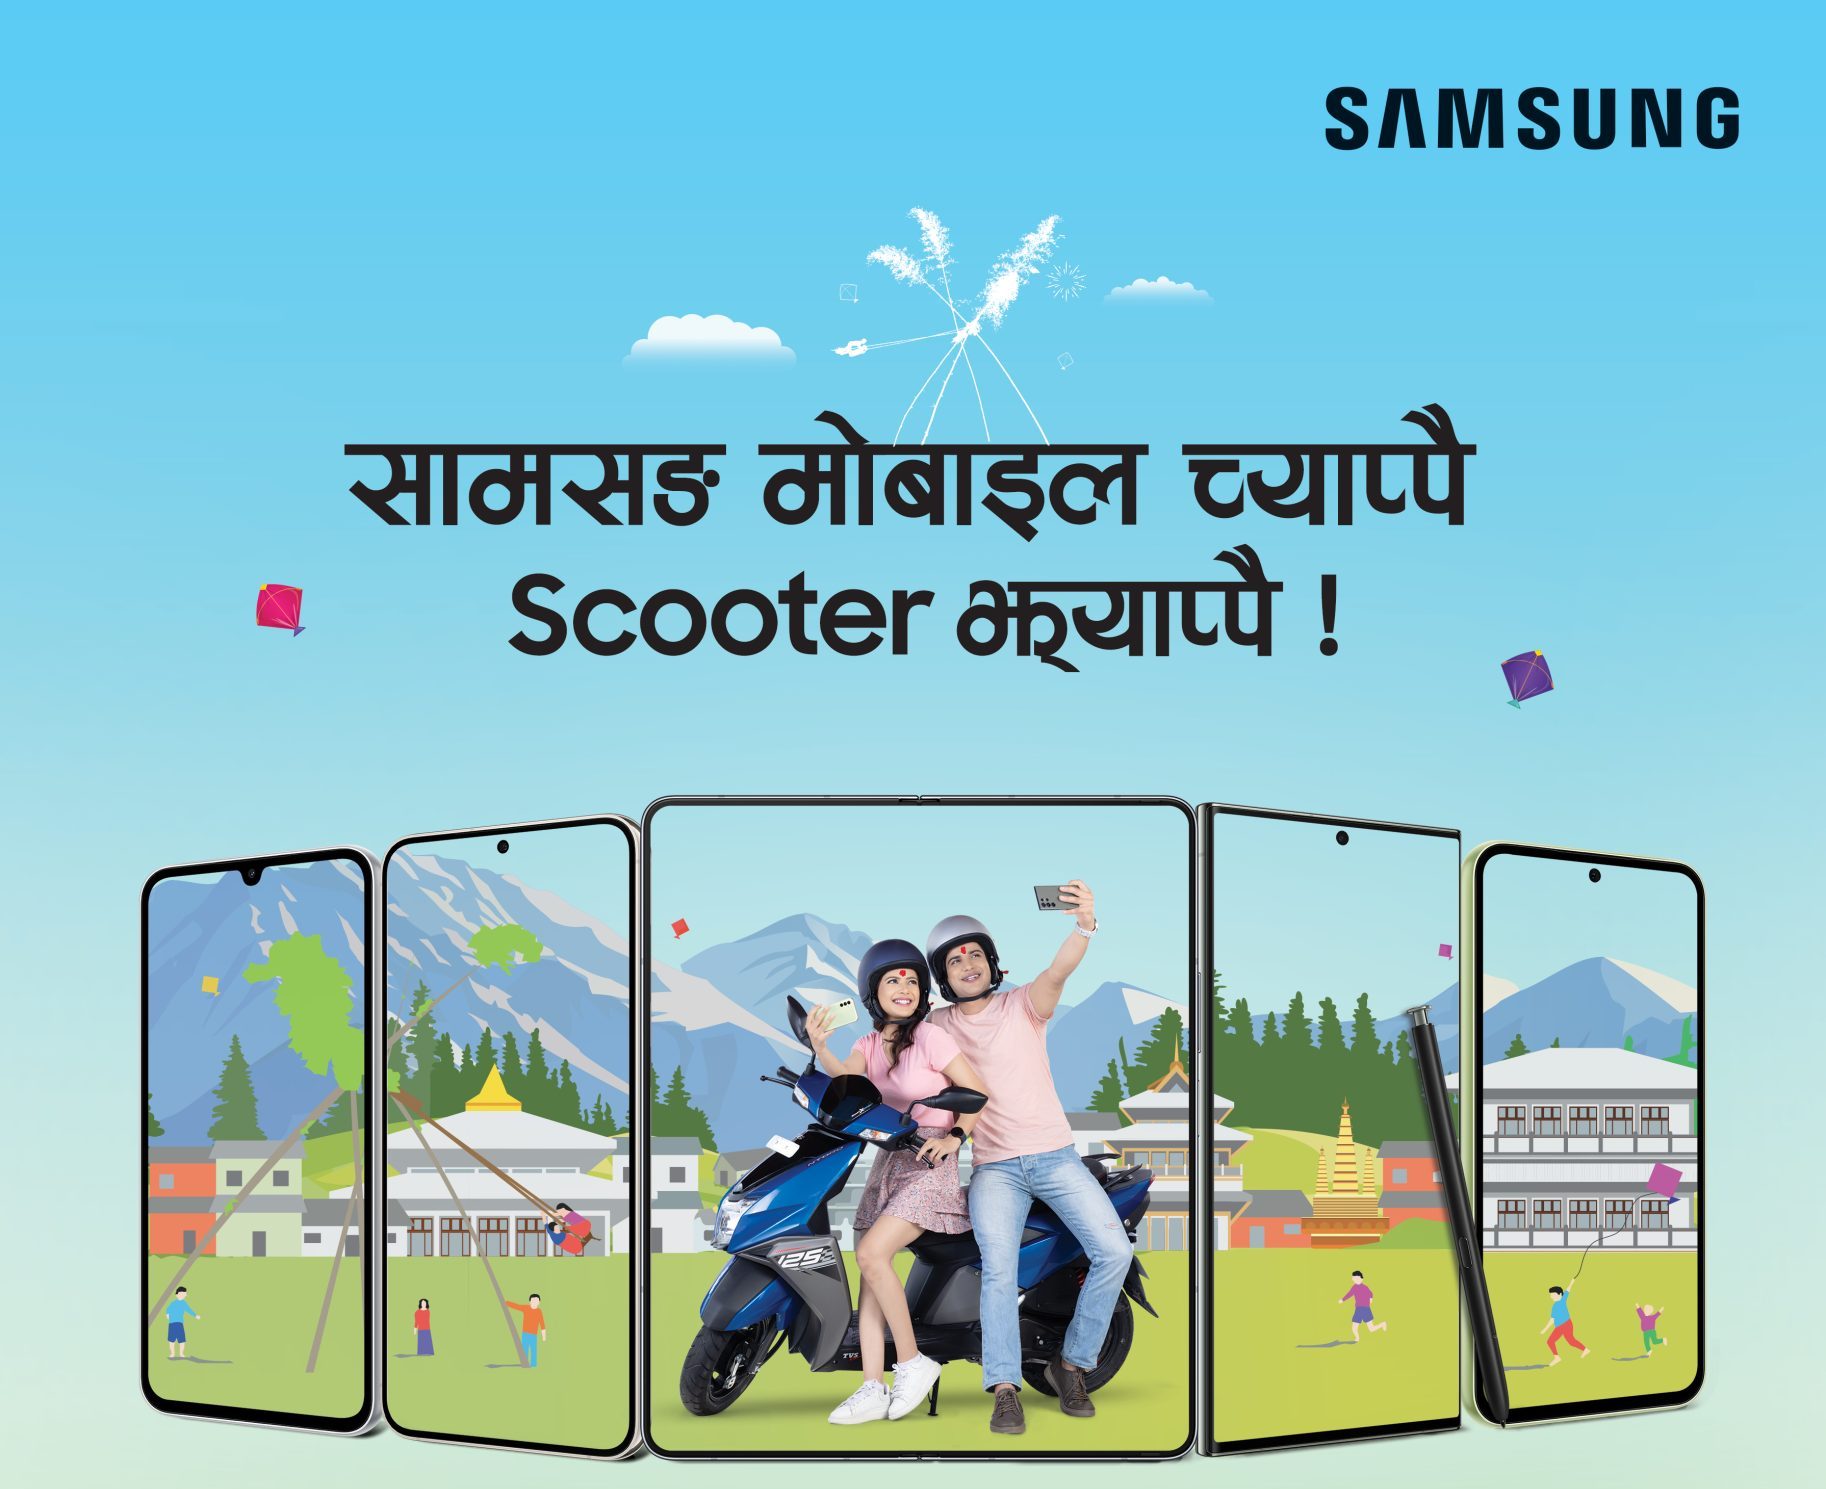 Samsung delivering Happiness this Dashain 2080 with Samsung Mobile Chyappai, Scooter Jhyappai! Offer